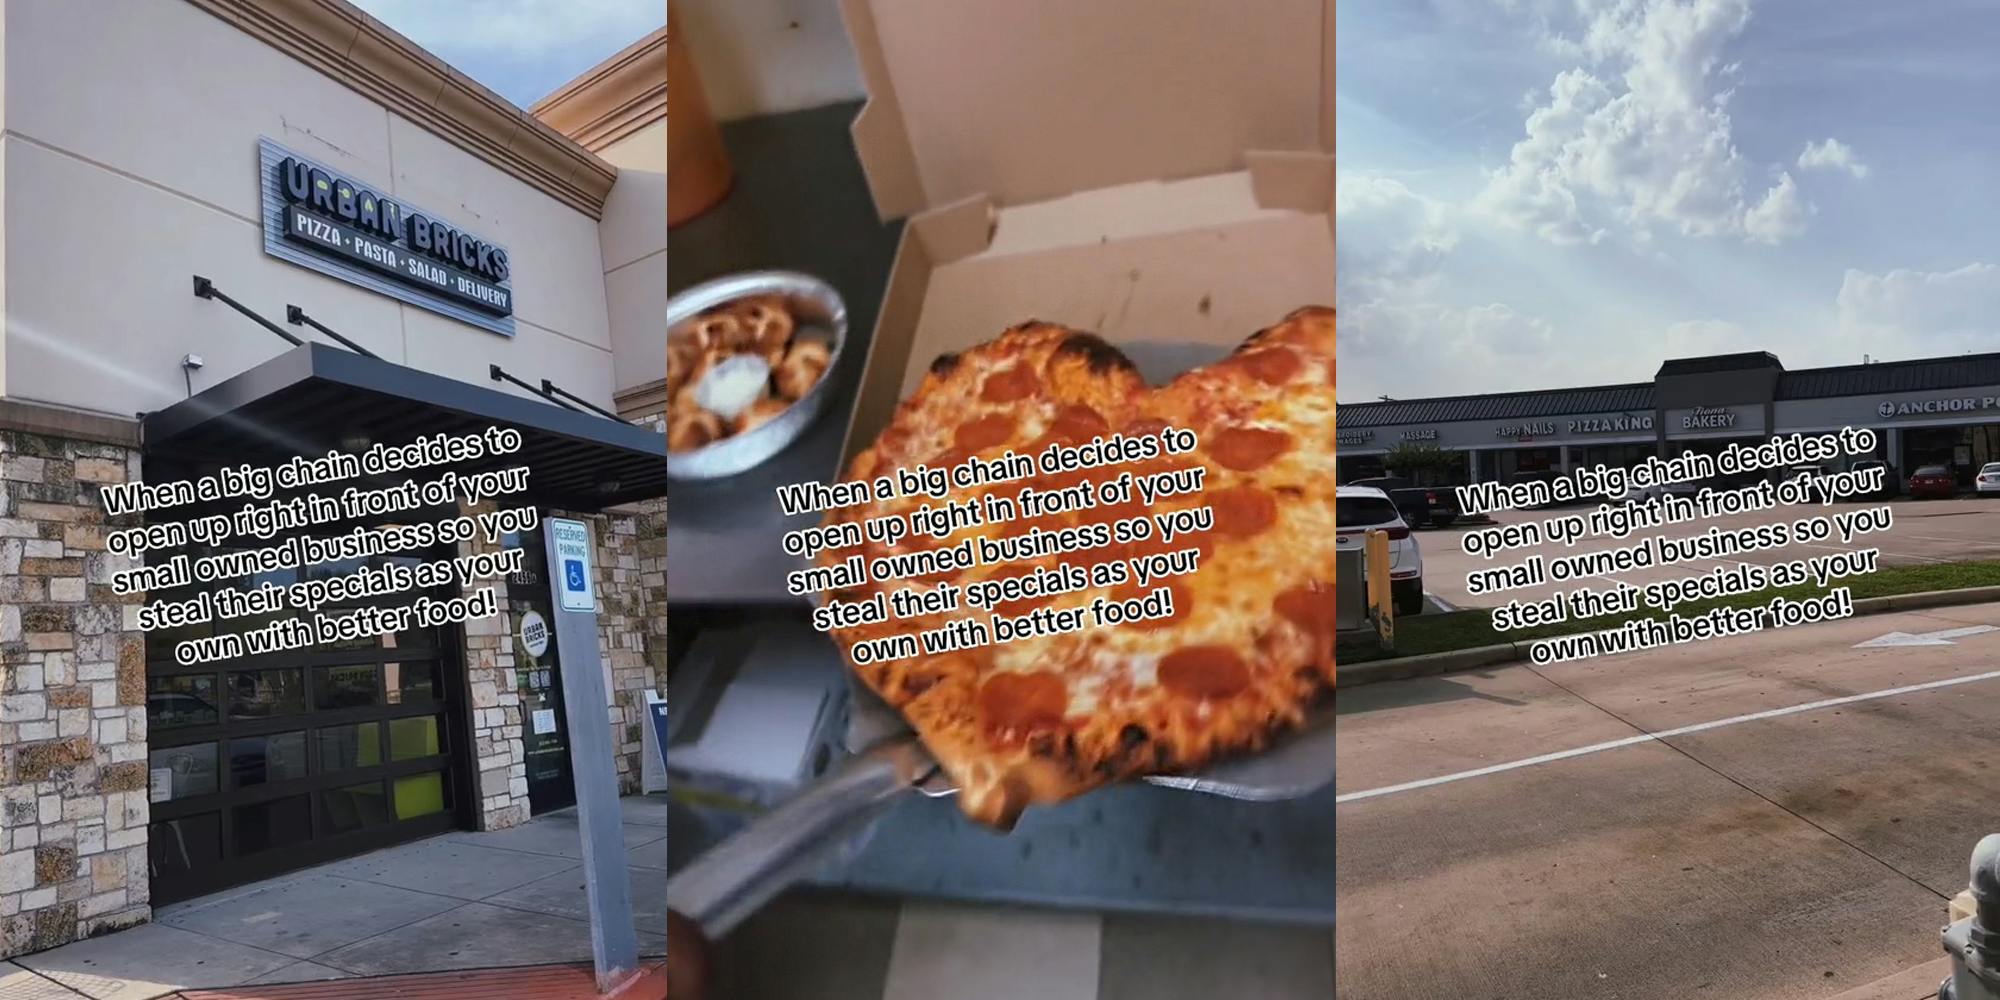 Urban Bricks pizza shop with caption "When a big chain decides to open up right in front of your small owned business so you steal their specials as your own with better food" (l) heart shaped pizza being slid into box with caption "When a big chain decides to open up right in front of your small owned business so you steal their specials as your own with better food" (c) pizza shop next to other shops with caption "When a big chain decides to open up right in front of your small owned business so you steal their specials as your own with better food" (r)